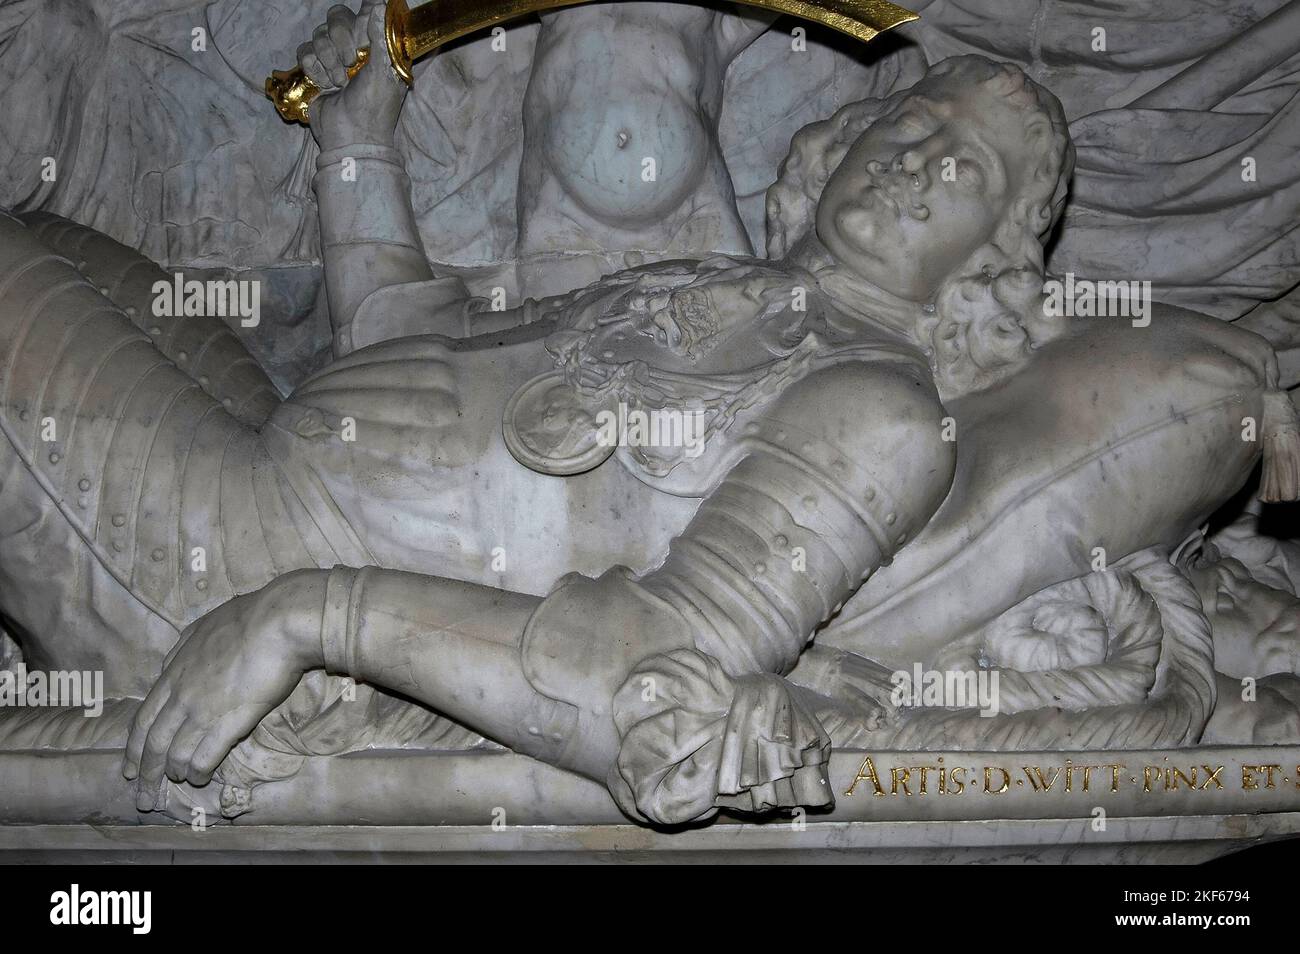 A Dutch vice-admiral killed by an English musket ball: marble effigy, holding a gilded scimitar, of Abraham van der Hulst on his elaborate Baroque wall monument in the Oude Kerk (Old Church) in Ouderkerksplein, Amsterdam, Netherlands.  Van der Hulst died in the Four Days’ Battle fought in the southern North Sea in June 1666, during the Second Anglo-Dutch War. Stock Photo